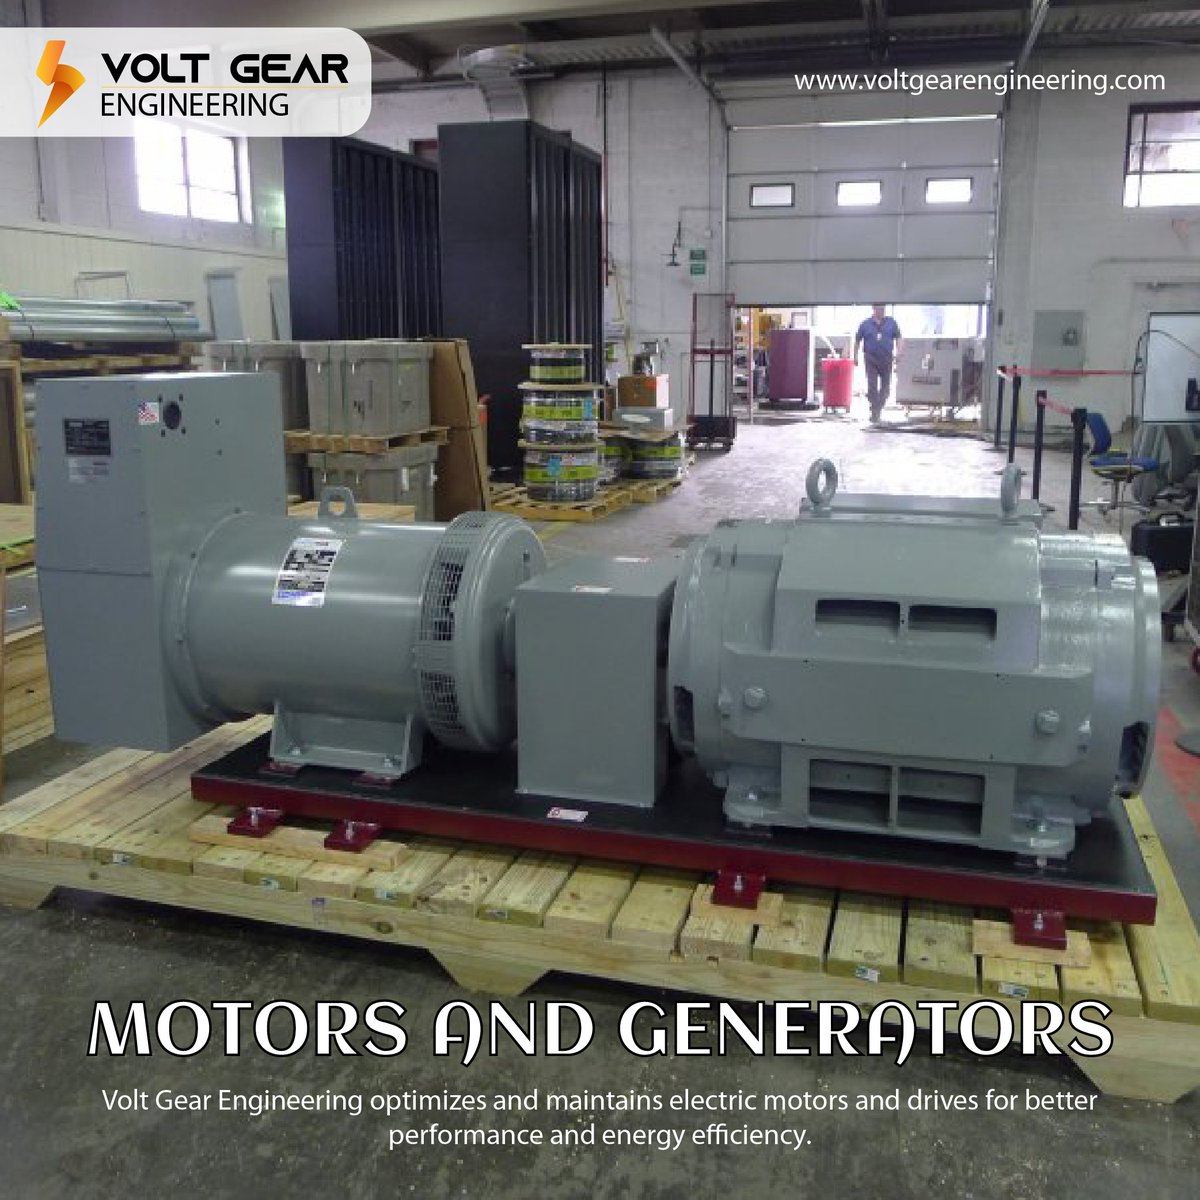 Need a power boost? Check out our latest motor and generator technologies that are revolutionizing the industry!  Stay powered up with us!
.
.
#motorsandgenerators #voltgearengineering #generators